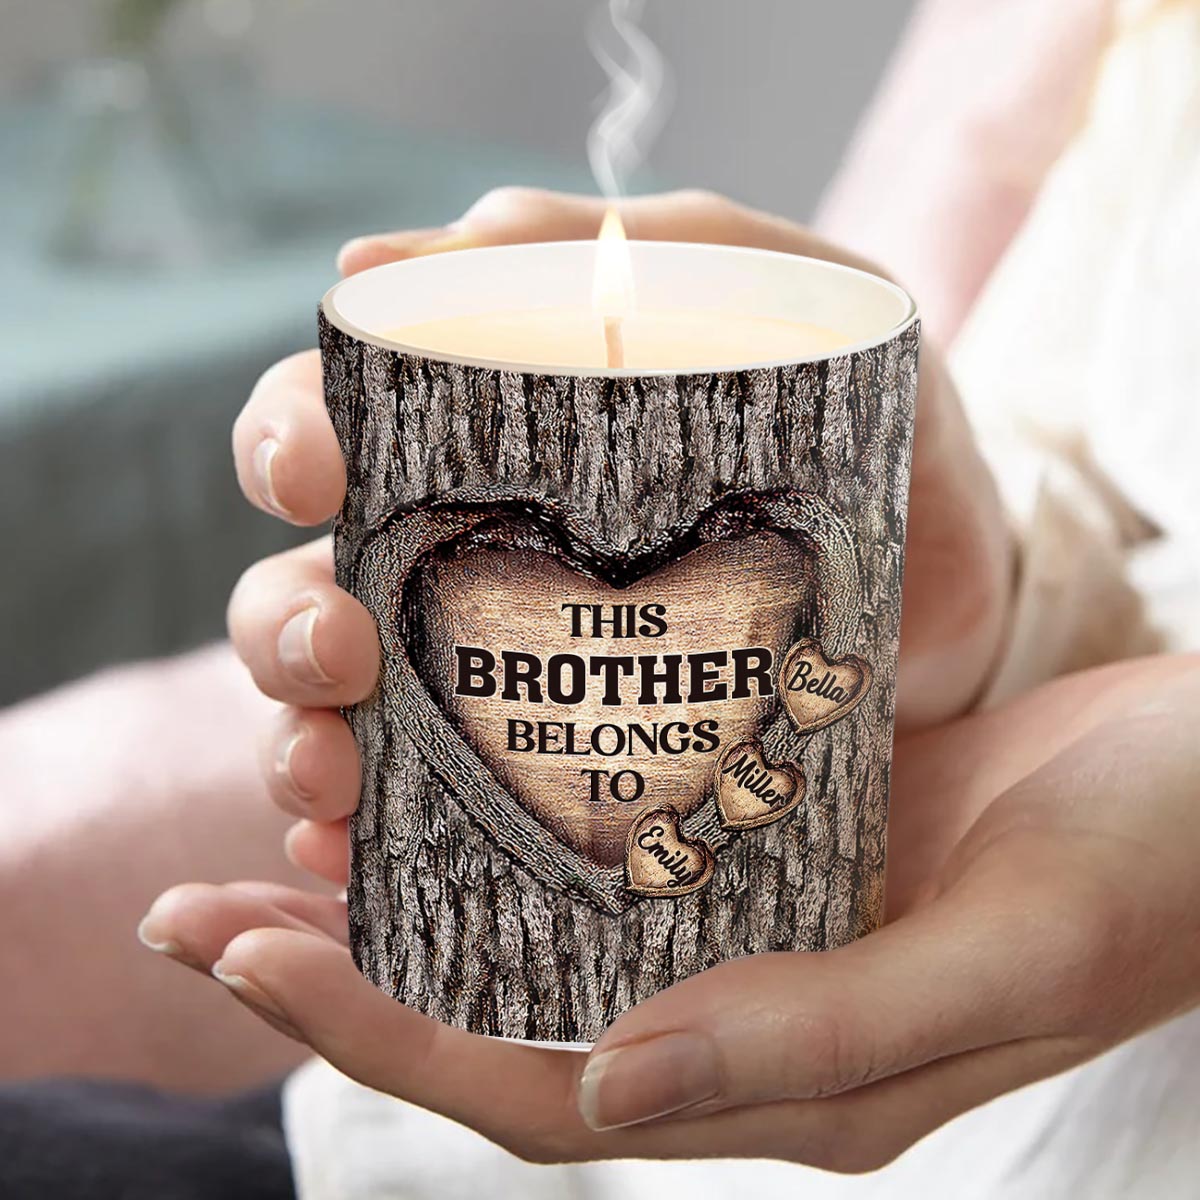 Dad's Heart - Gift for dad, grandma, grandpa, mom, uncle, aunt, brother, sister - Personalized Candle With Wooden Lid